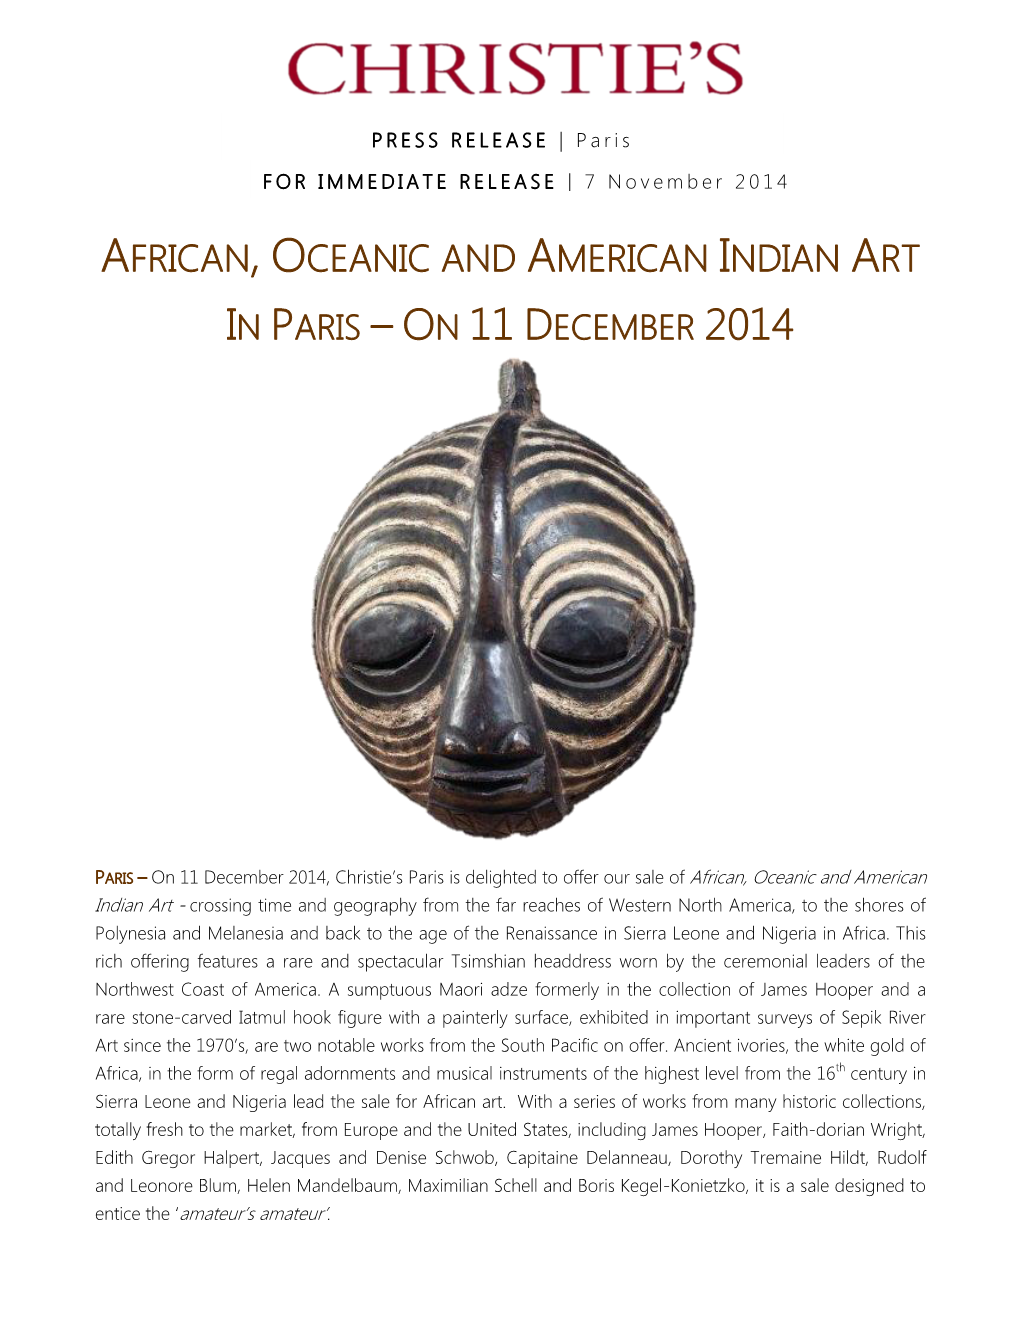 African, Oceanic and American Indian Art in Paris – on 11 December 2014